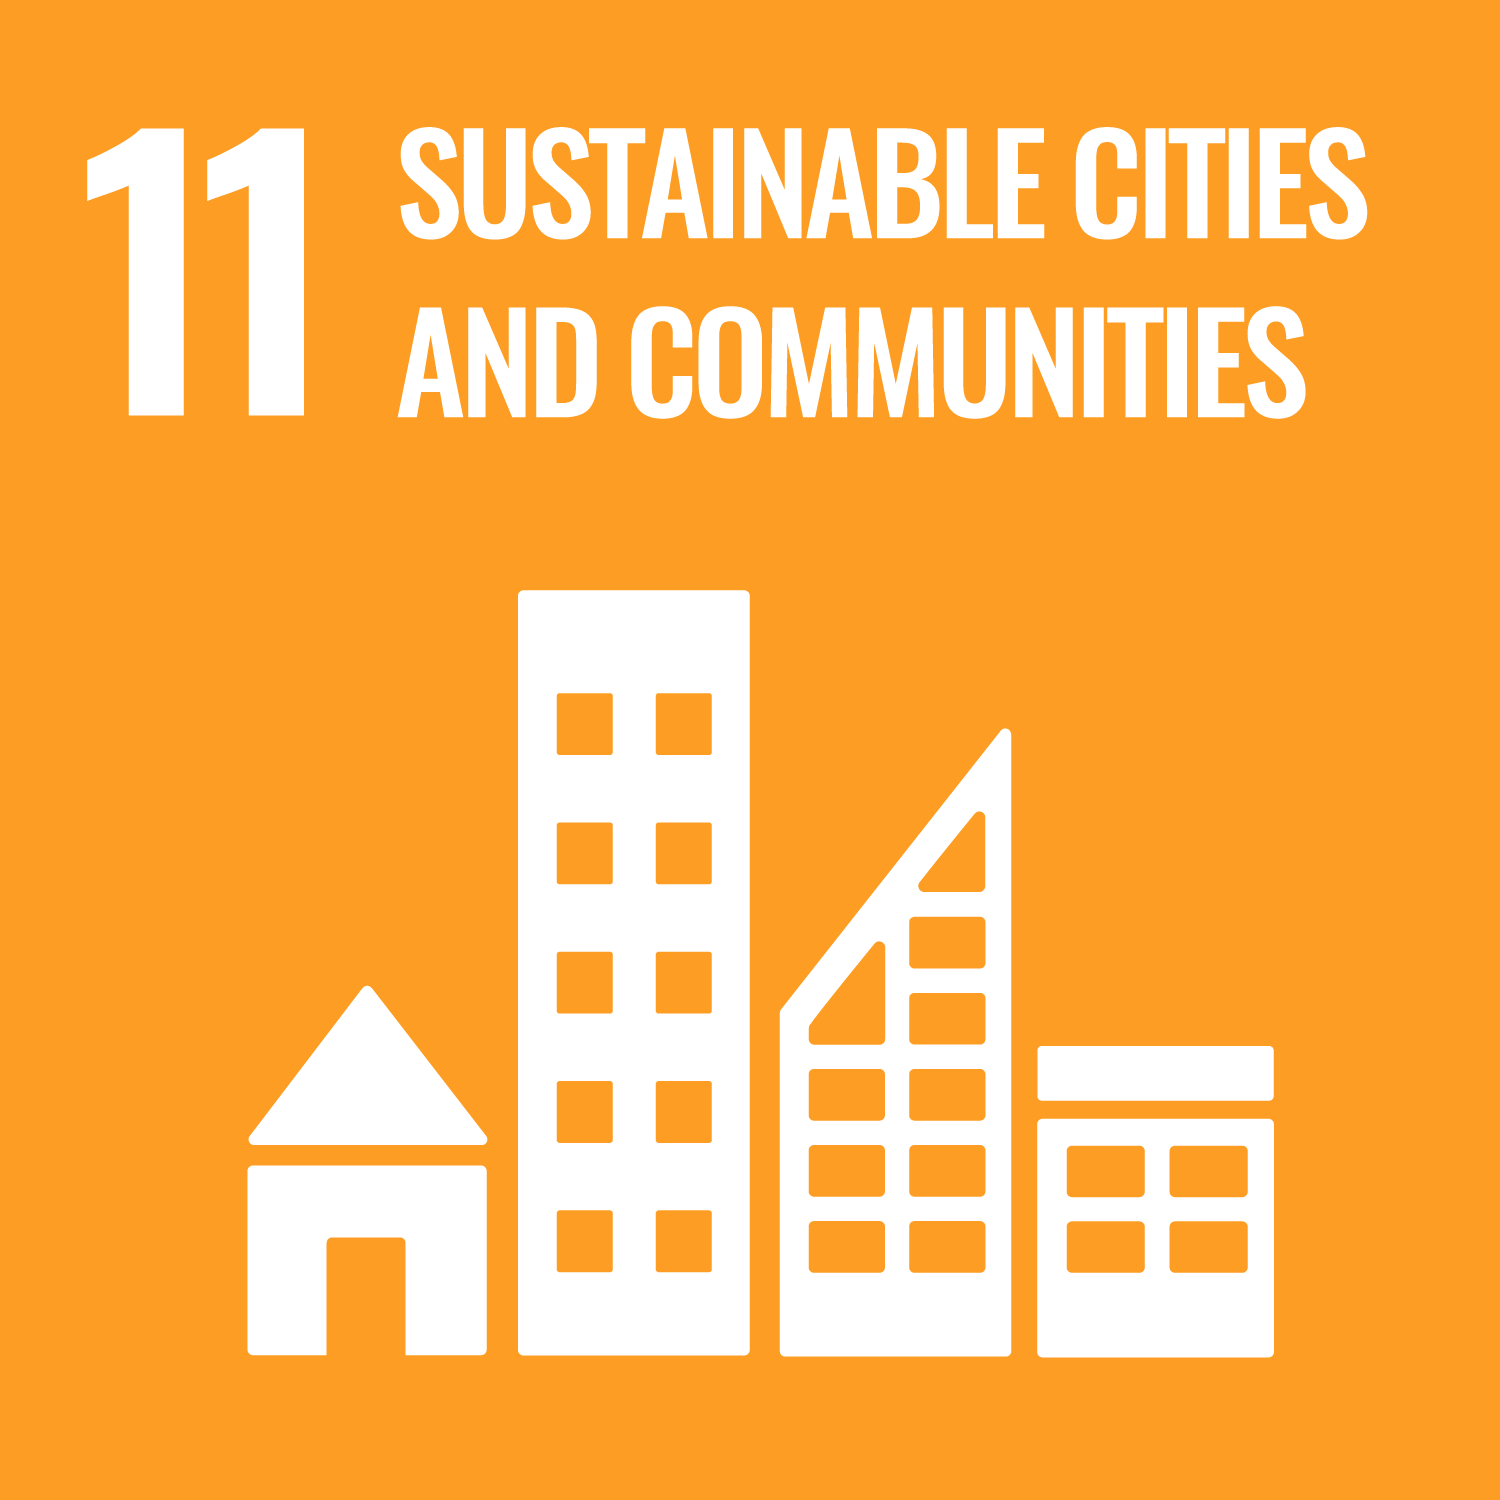 SDG Graphic Sustainable Cities and Communities